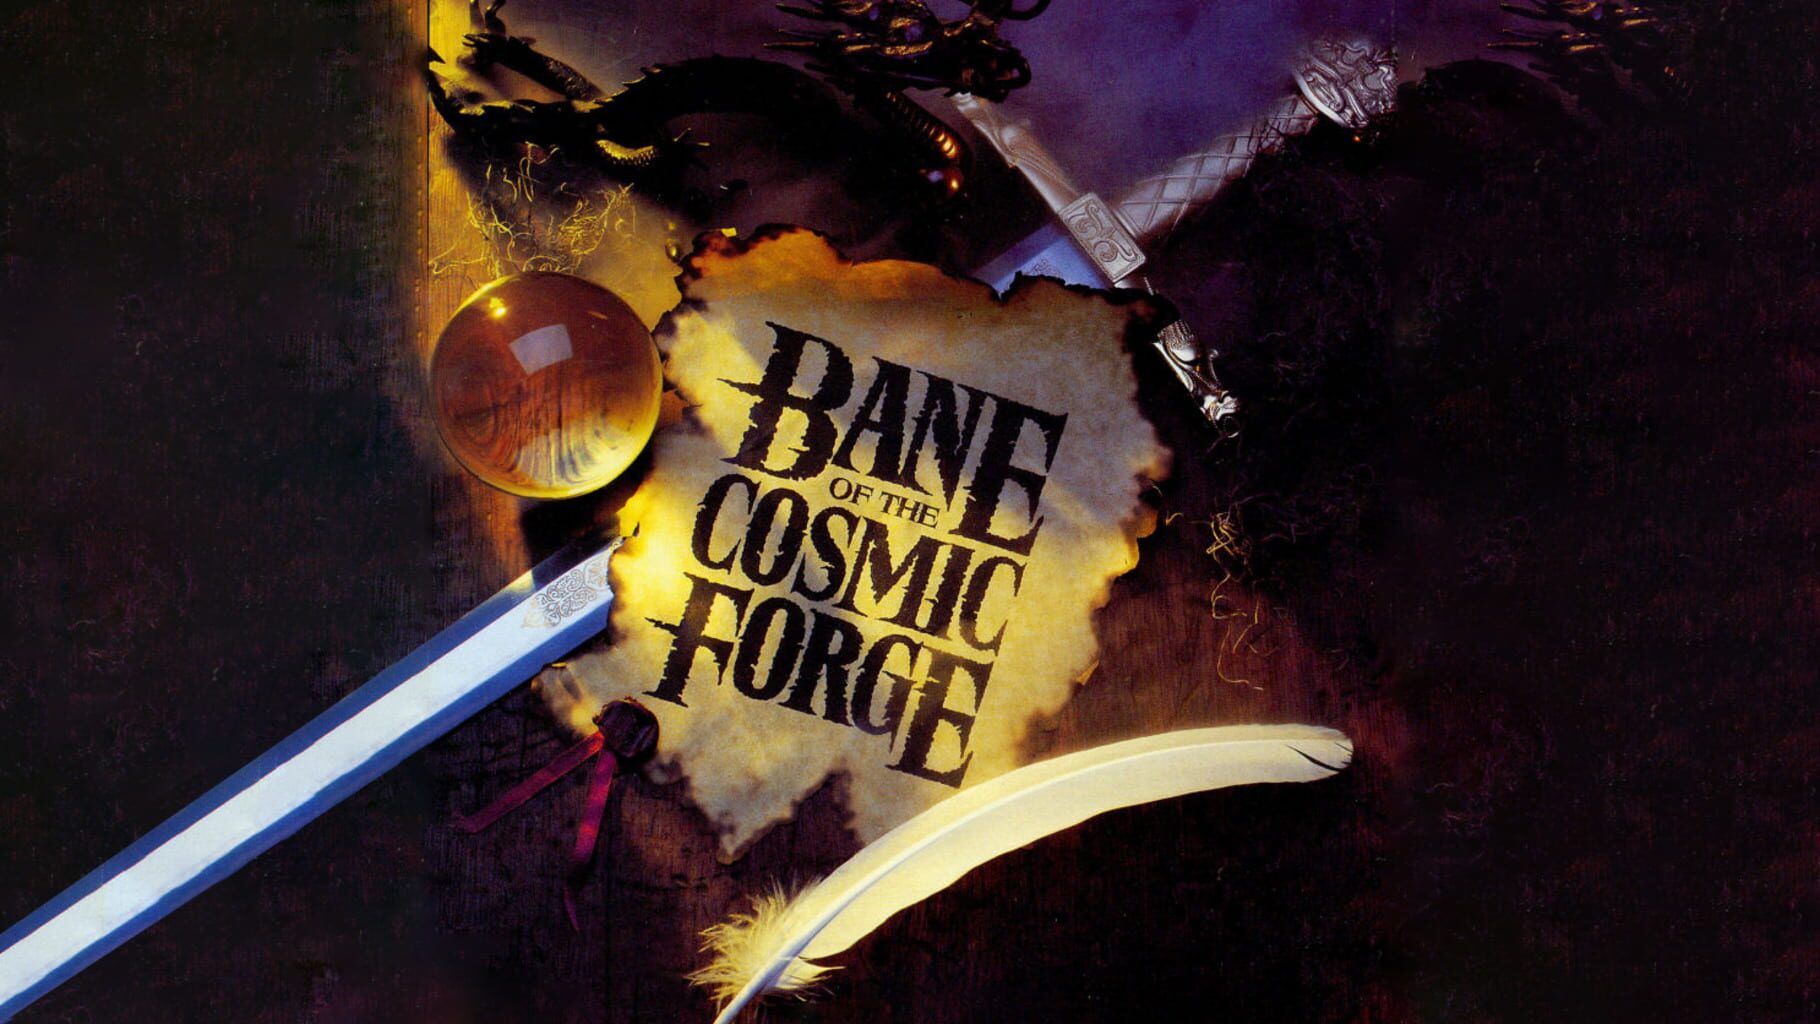 Arte - Wizardry: Bane of the Cosmic Forge